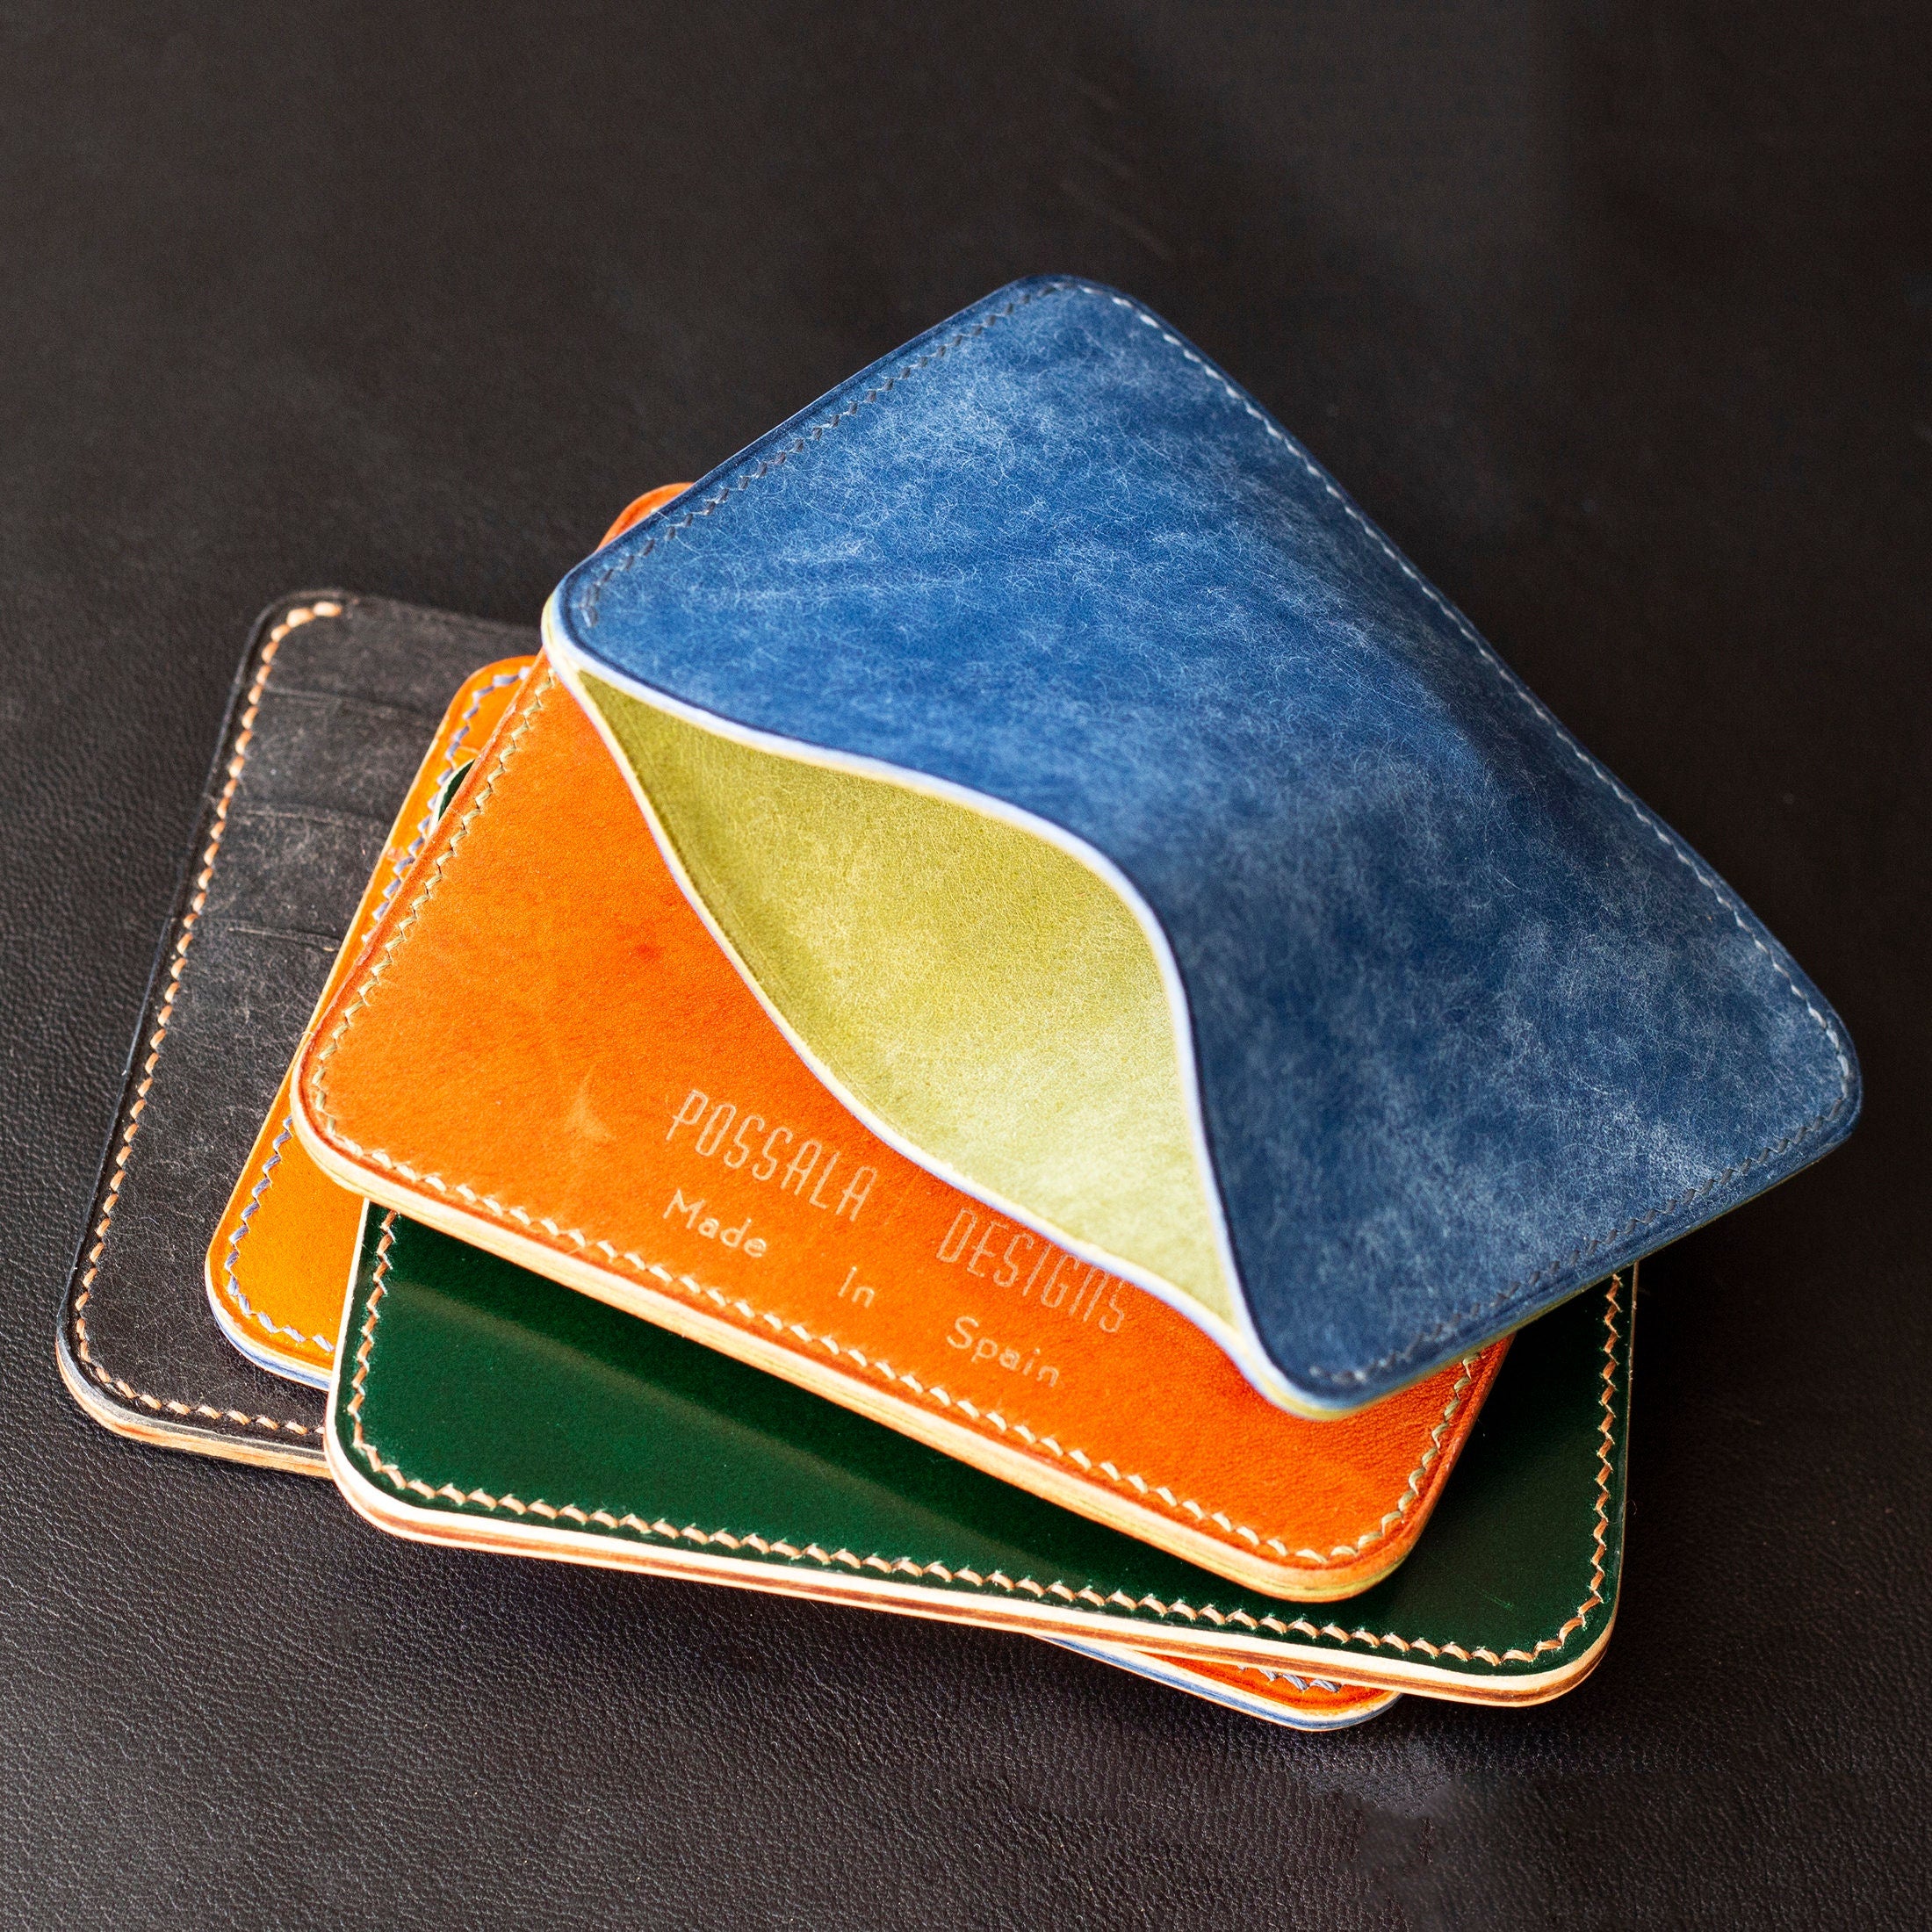 Minimalist Leather Card Wallet 3 pockets Orange and Blue Vegetable Tanned Italian Leather, Handmade Card Holder in Spain Handcrafted